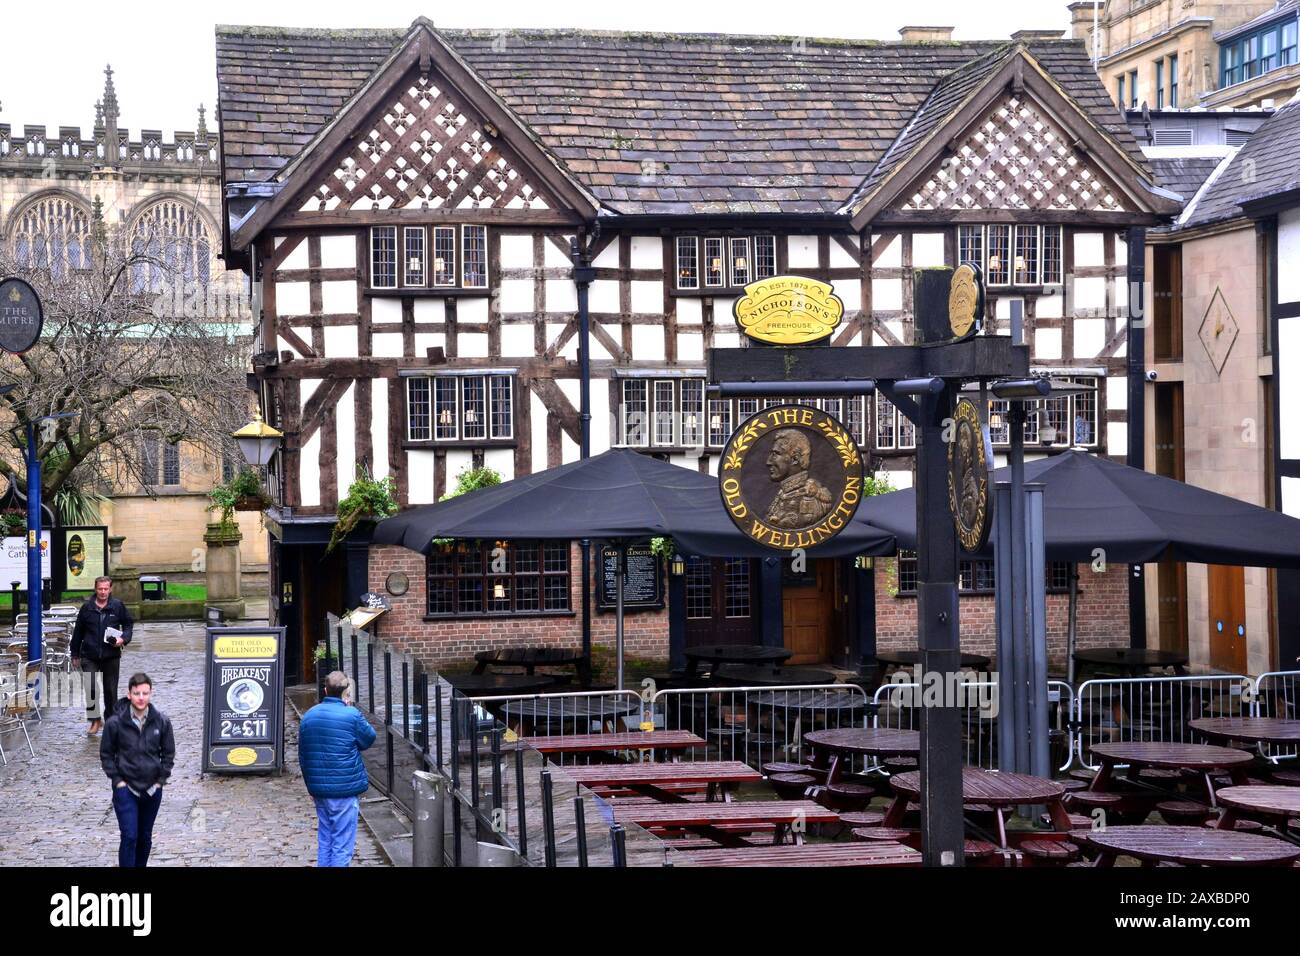 The Old Wellington public house in central Manchester, uk. Built in 1552, The Old Wellington is the oldest building of its kind in Manchester. Stock Photo